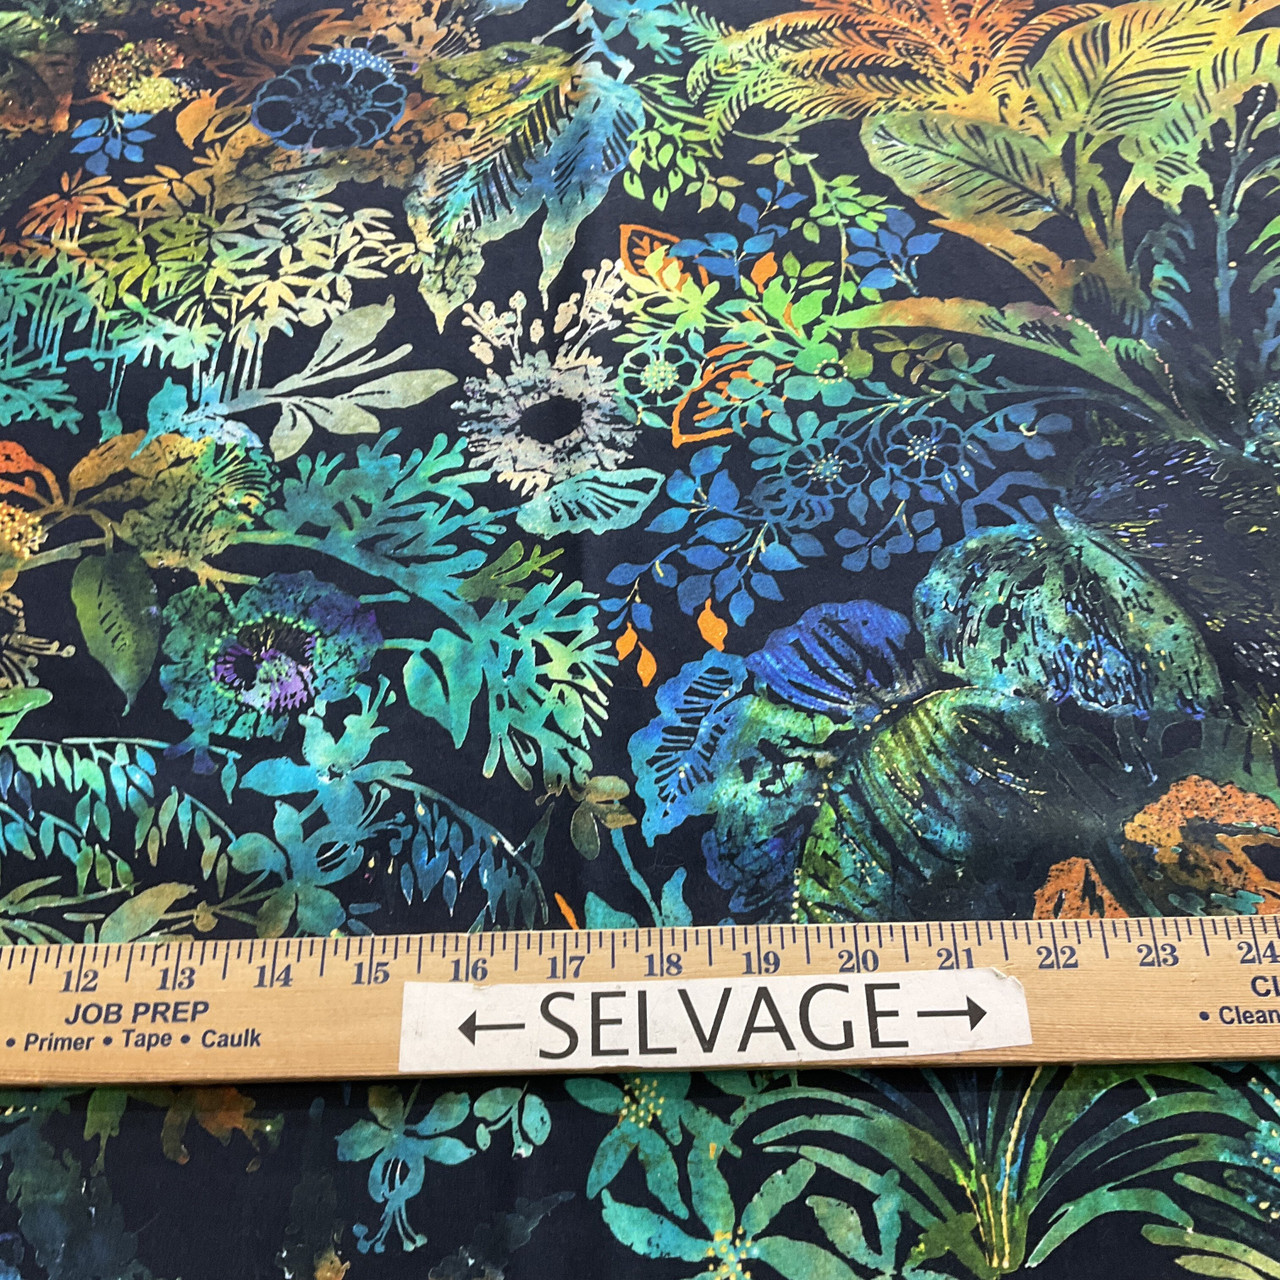 Tropical Fabric by the Yard, Vintage Style Detailed Nature Scenery of  Leaves, Decorative Upholstery Fabric for Chairs & Home Accents, Multicolor  by